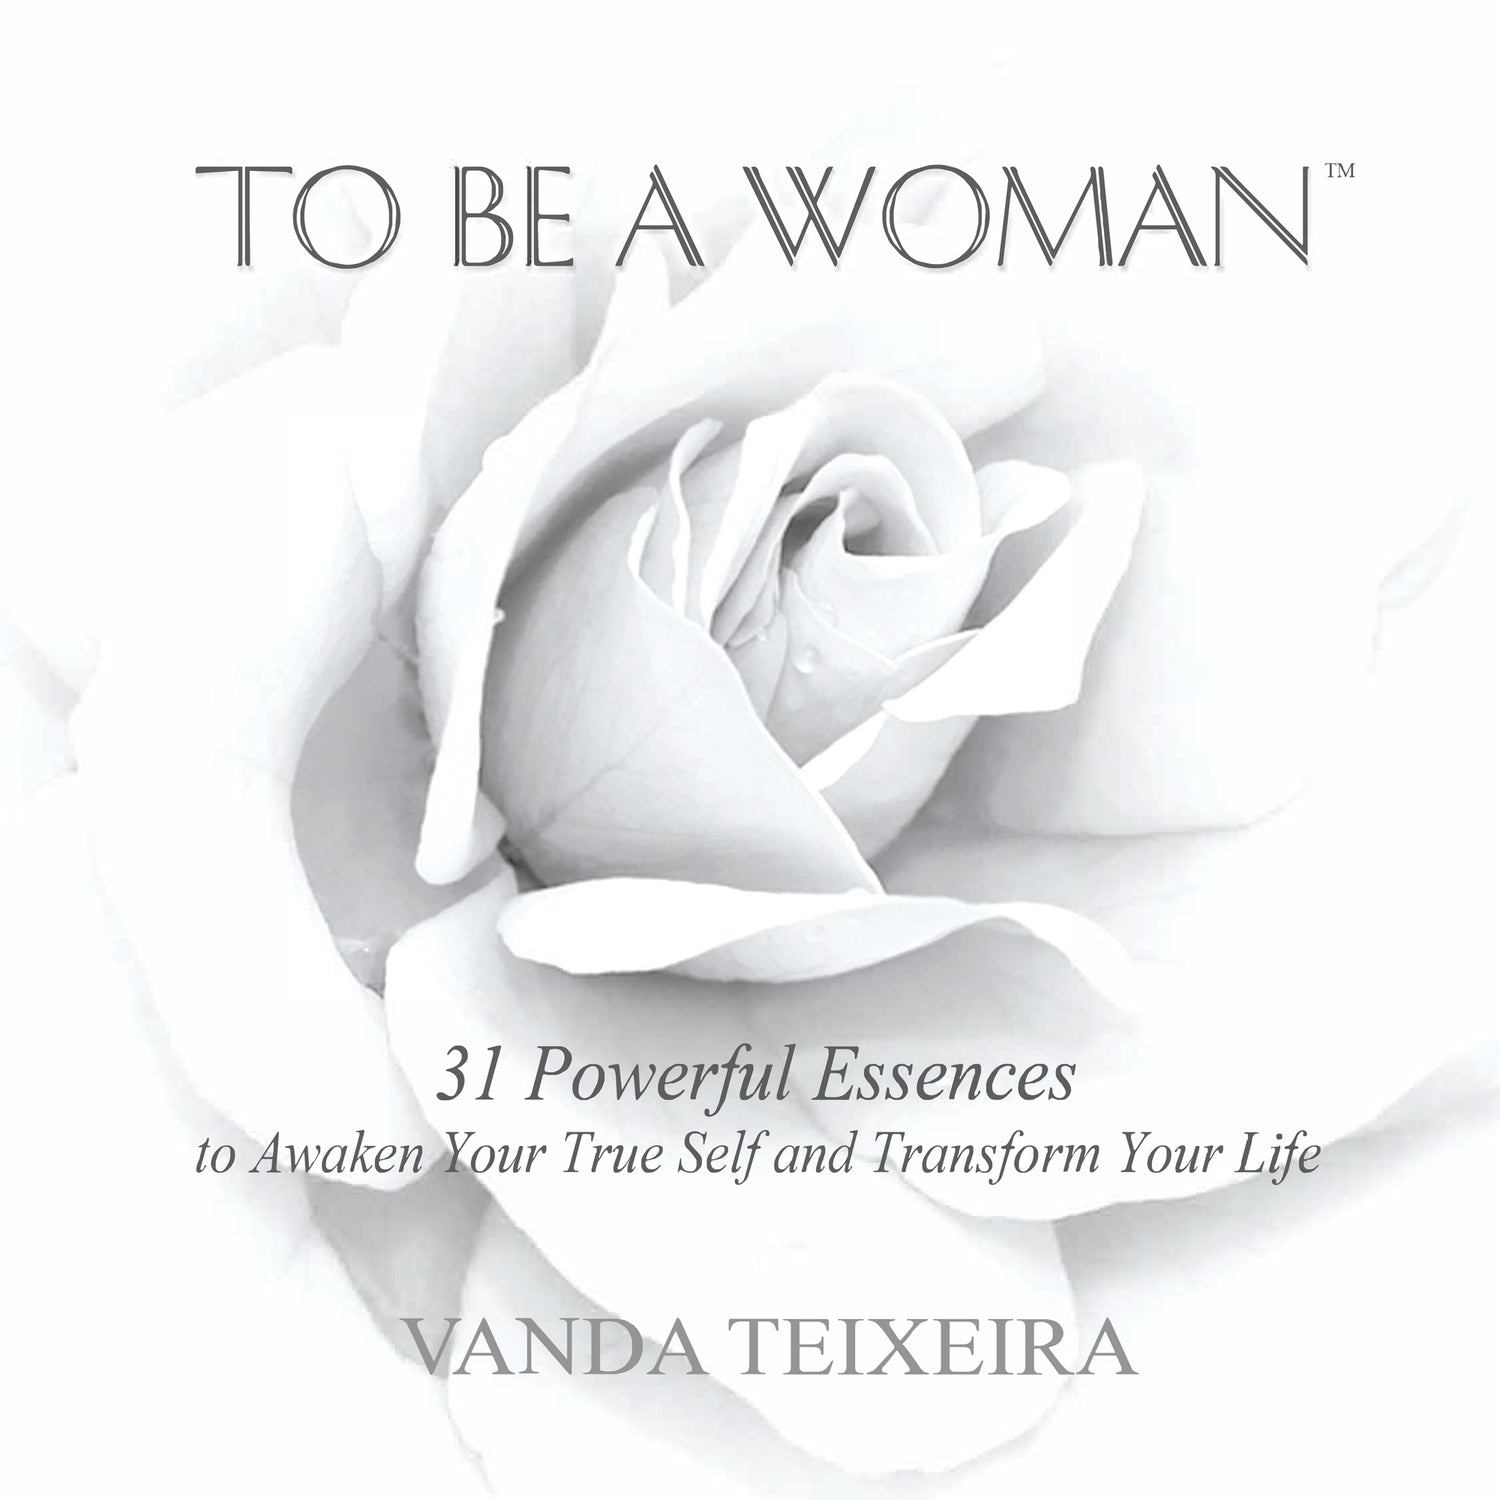 To Be A Woman, 31 Powerful Essences BOOK